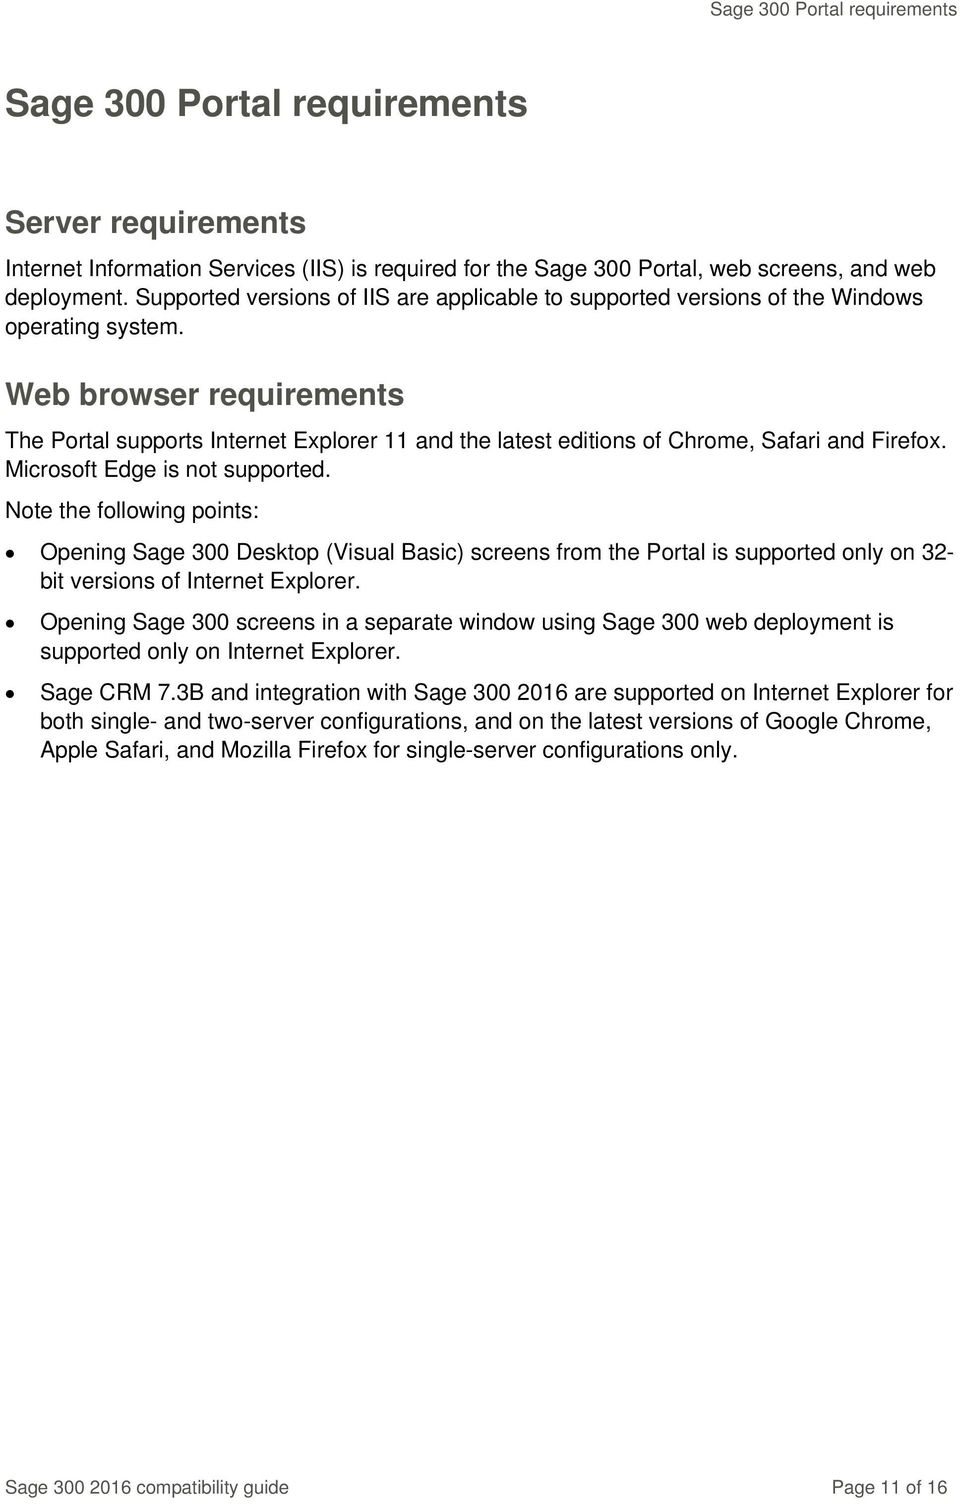 Web browser requirements The Portal supports Internet Explorer 11 and the latest editions of Chrome, Safari and Firefox. Microsoft Edge is not supported.